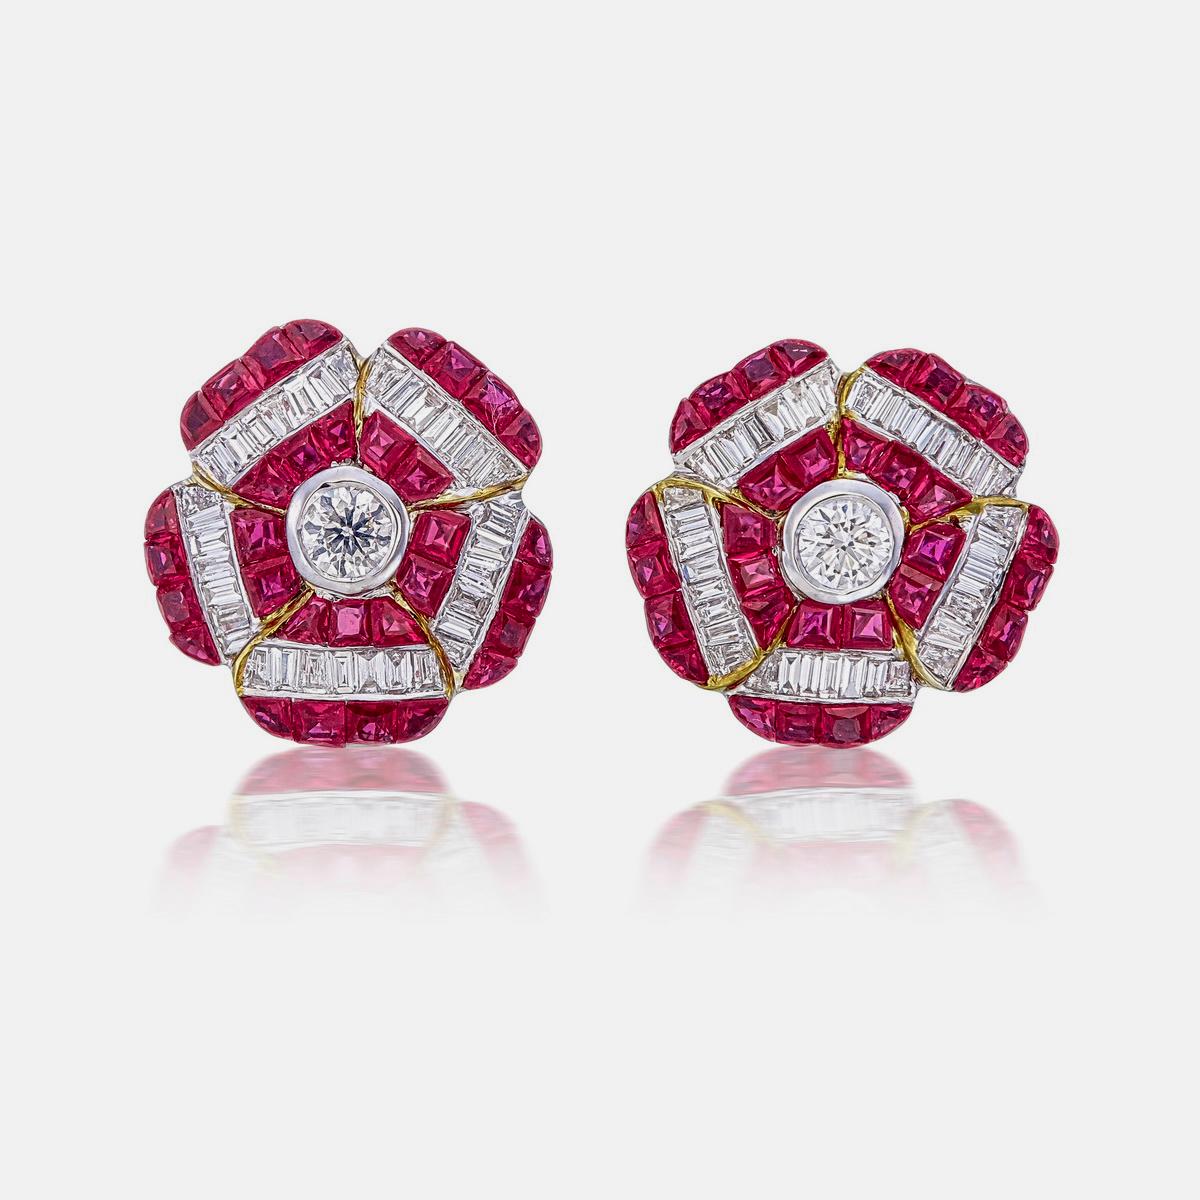 A pair of fine modern ruby and diamond floral earrings made in 18 Karat gold. A great choice for lifestyle wear.

- There are two center diamonds with the total weight of 0.24 carats
- There are seventy tapered-baguette supporting diamonds,